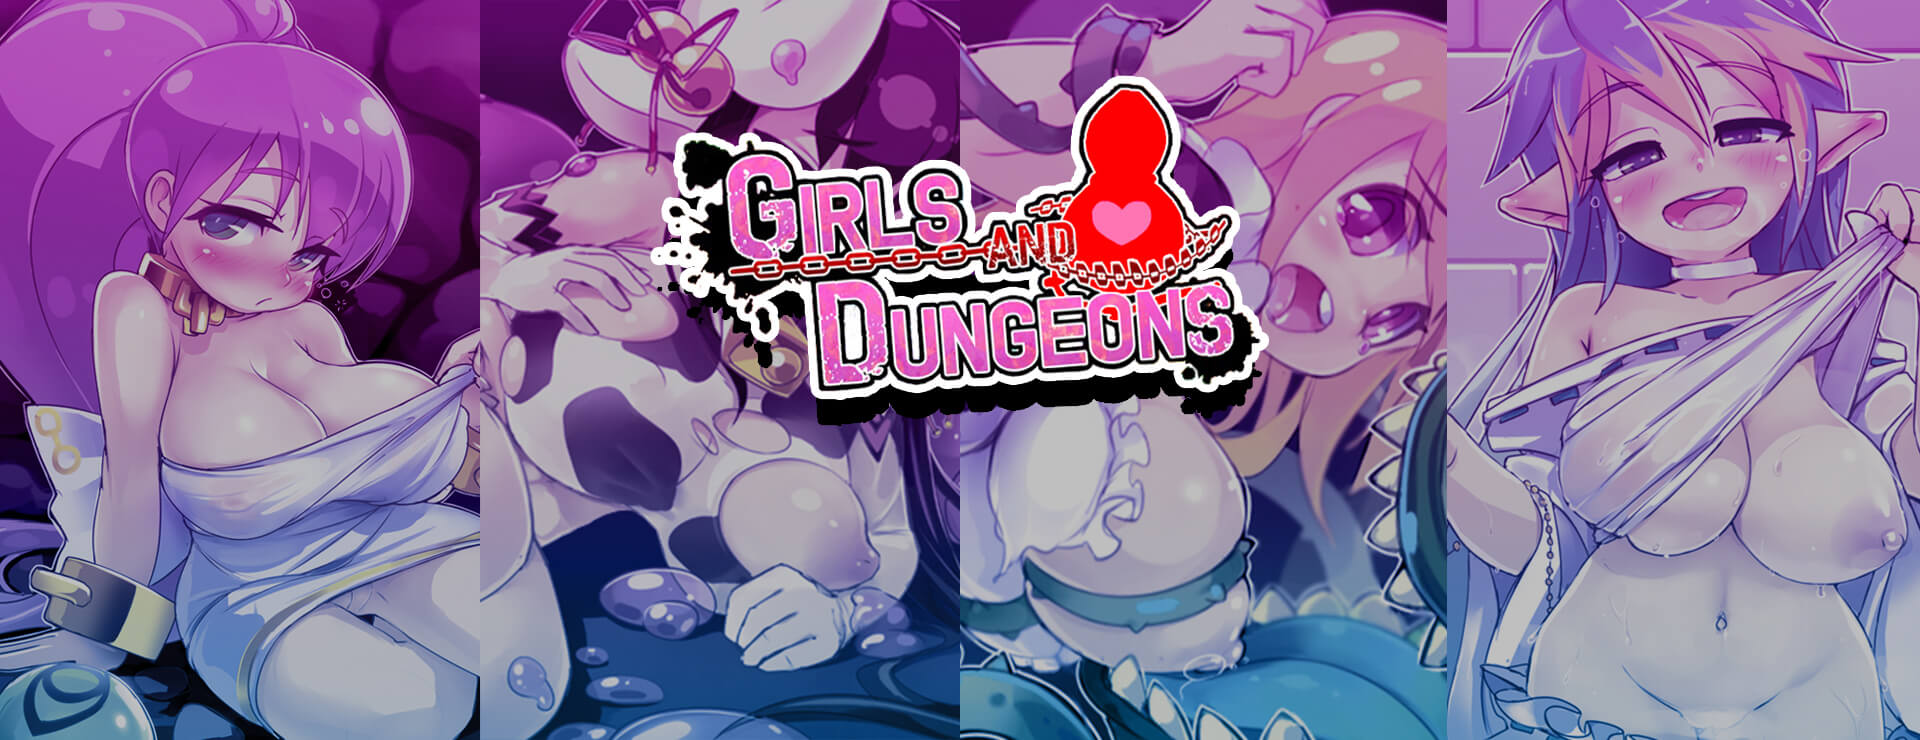 Girls And Dungeons - RPG Game